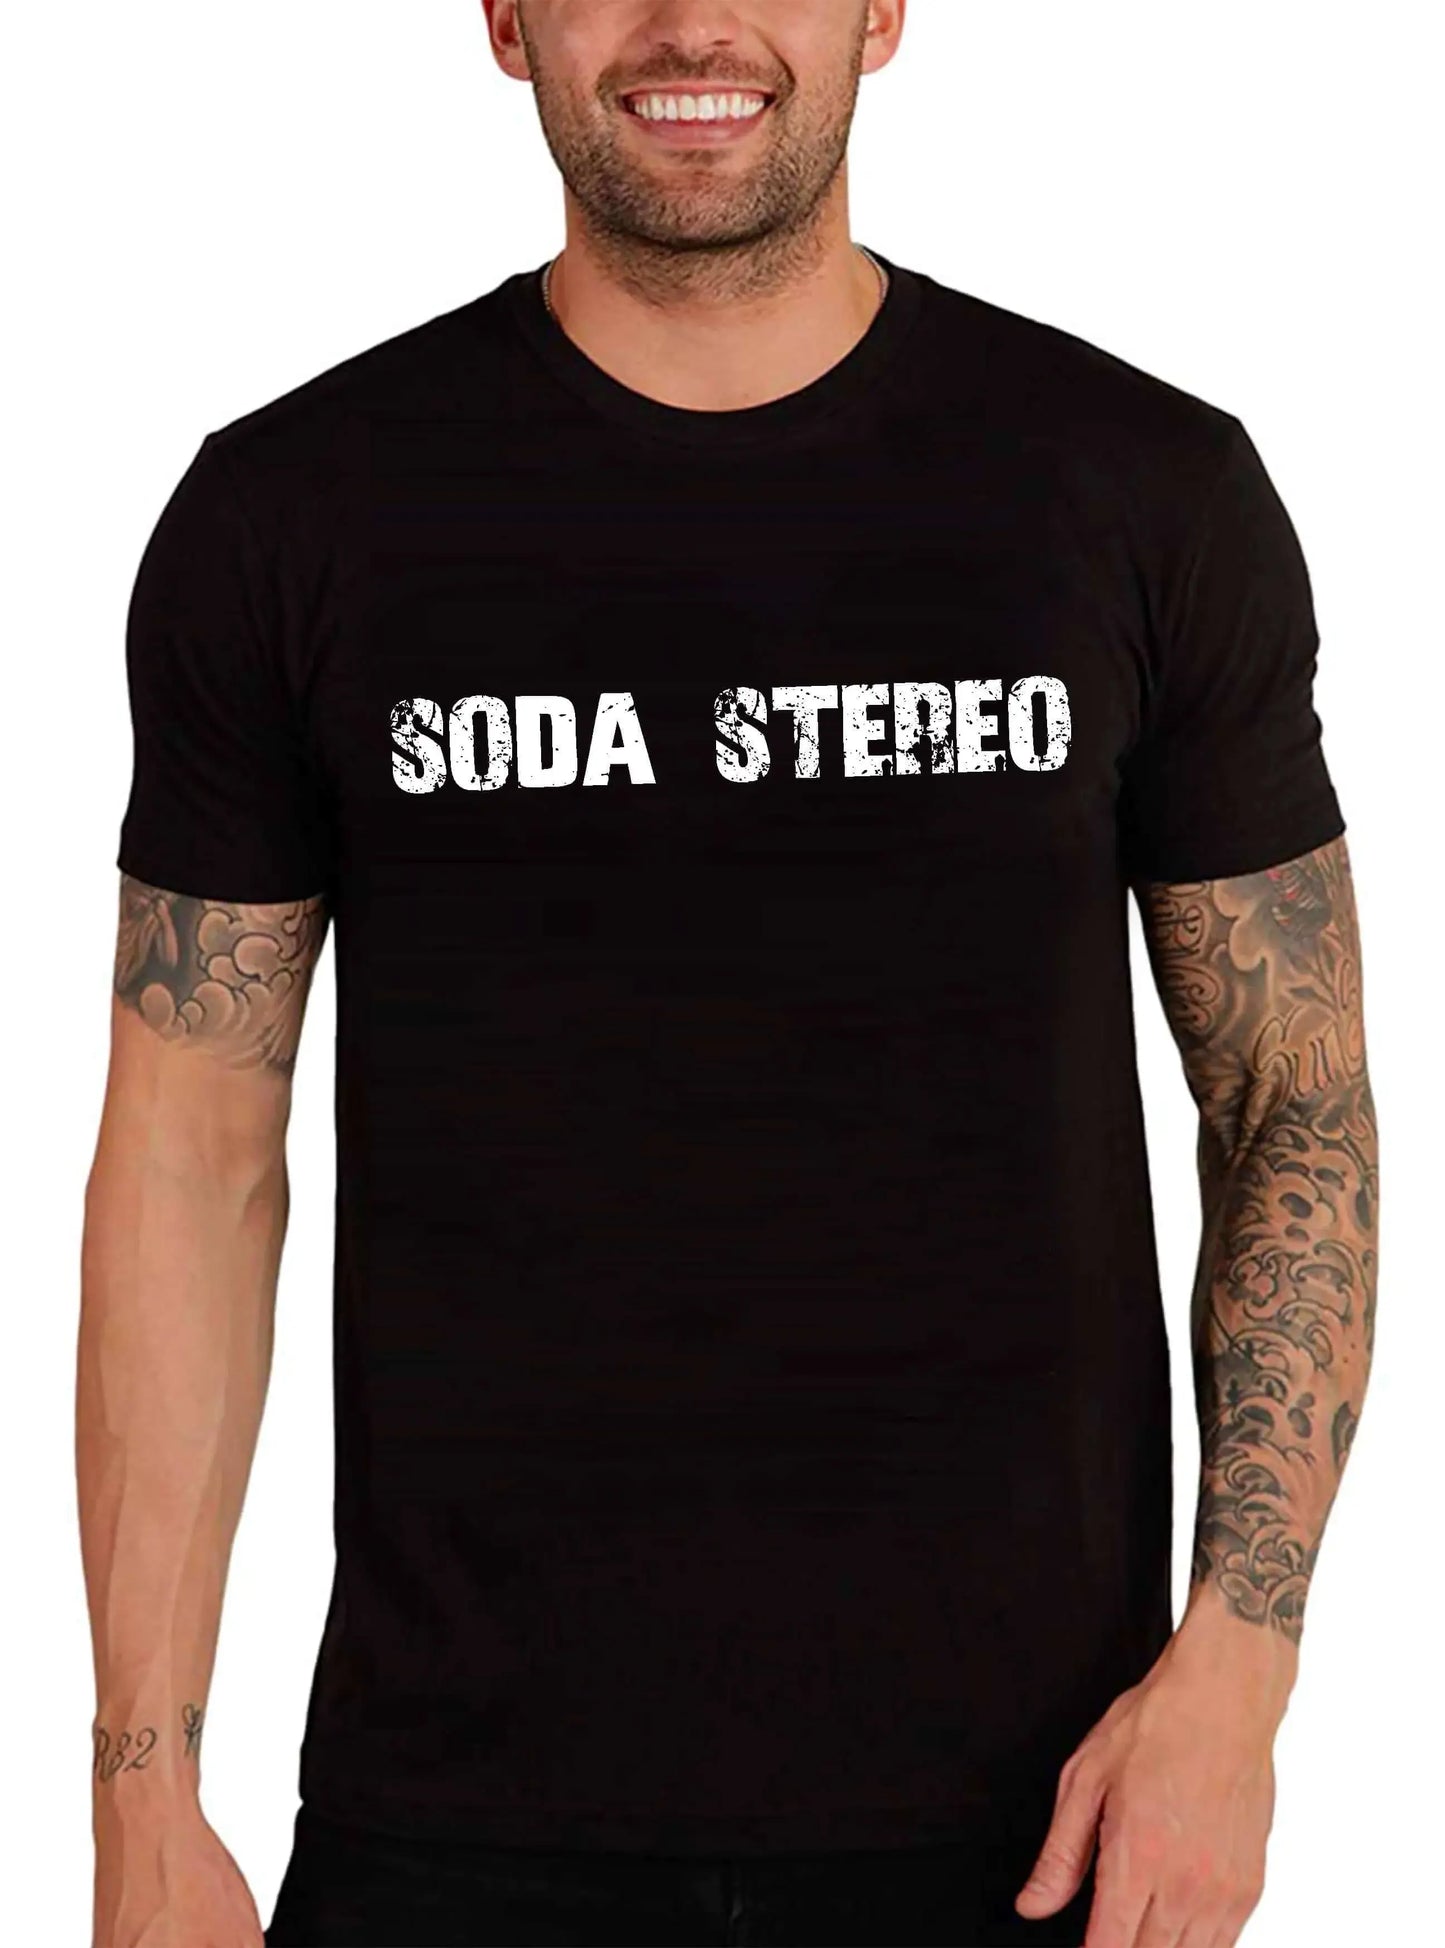 Men's Graphic T-Shirt Soda Stereo Eco-Friendly Limited Edition Short Sleeve Tee-Shirt Vintage Birthday Gift Novelty